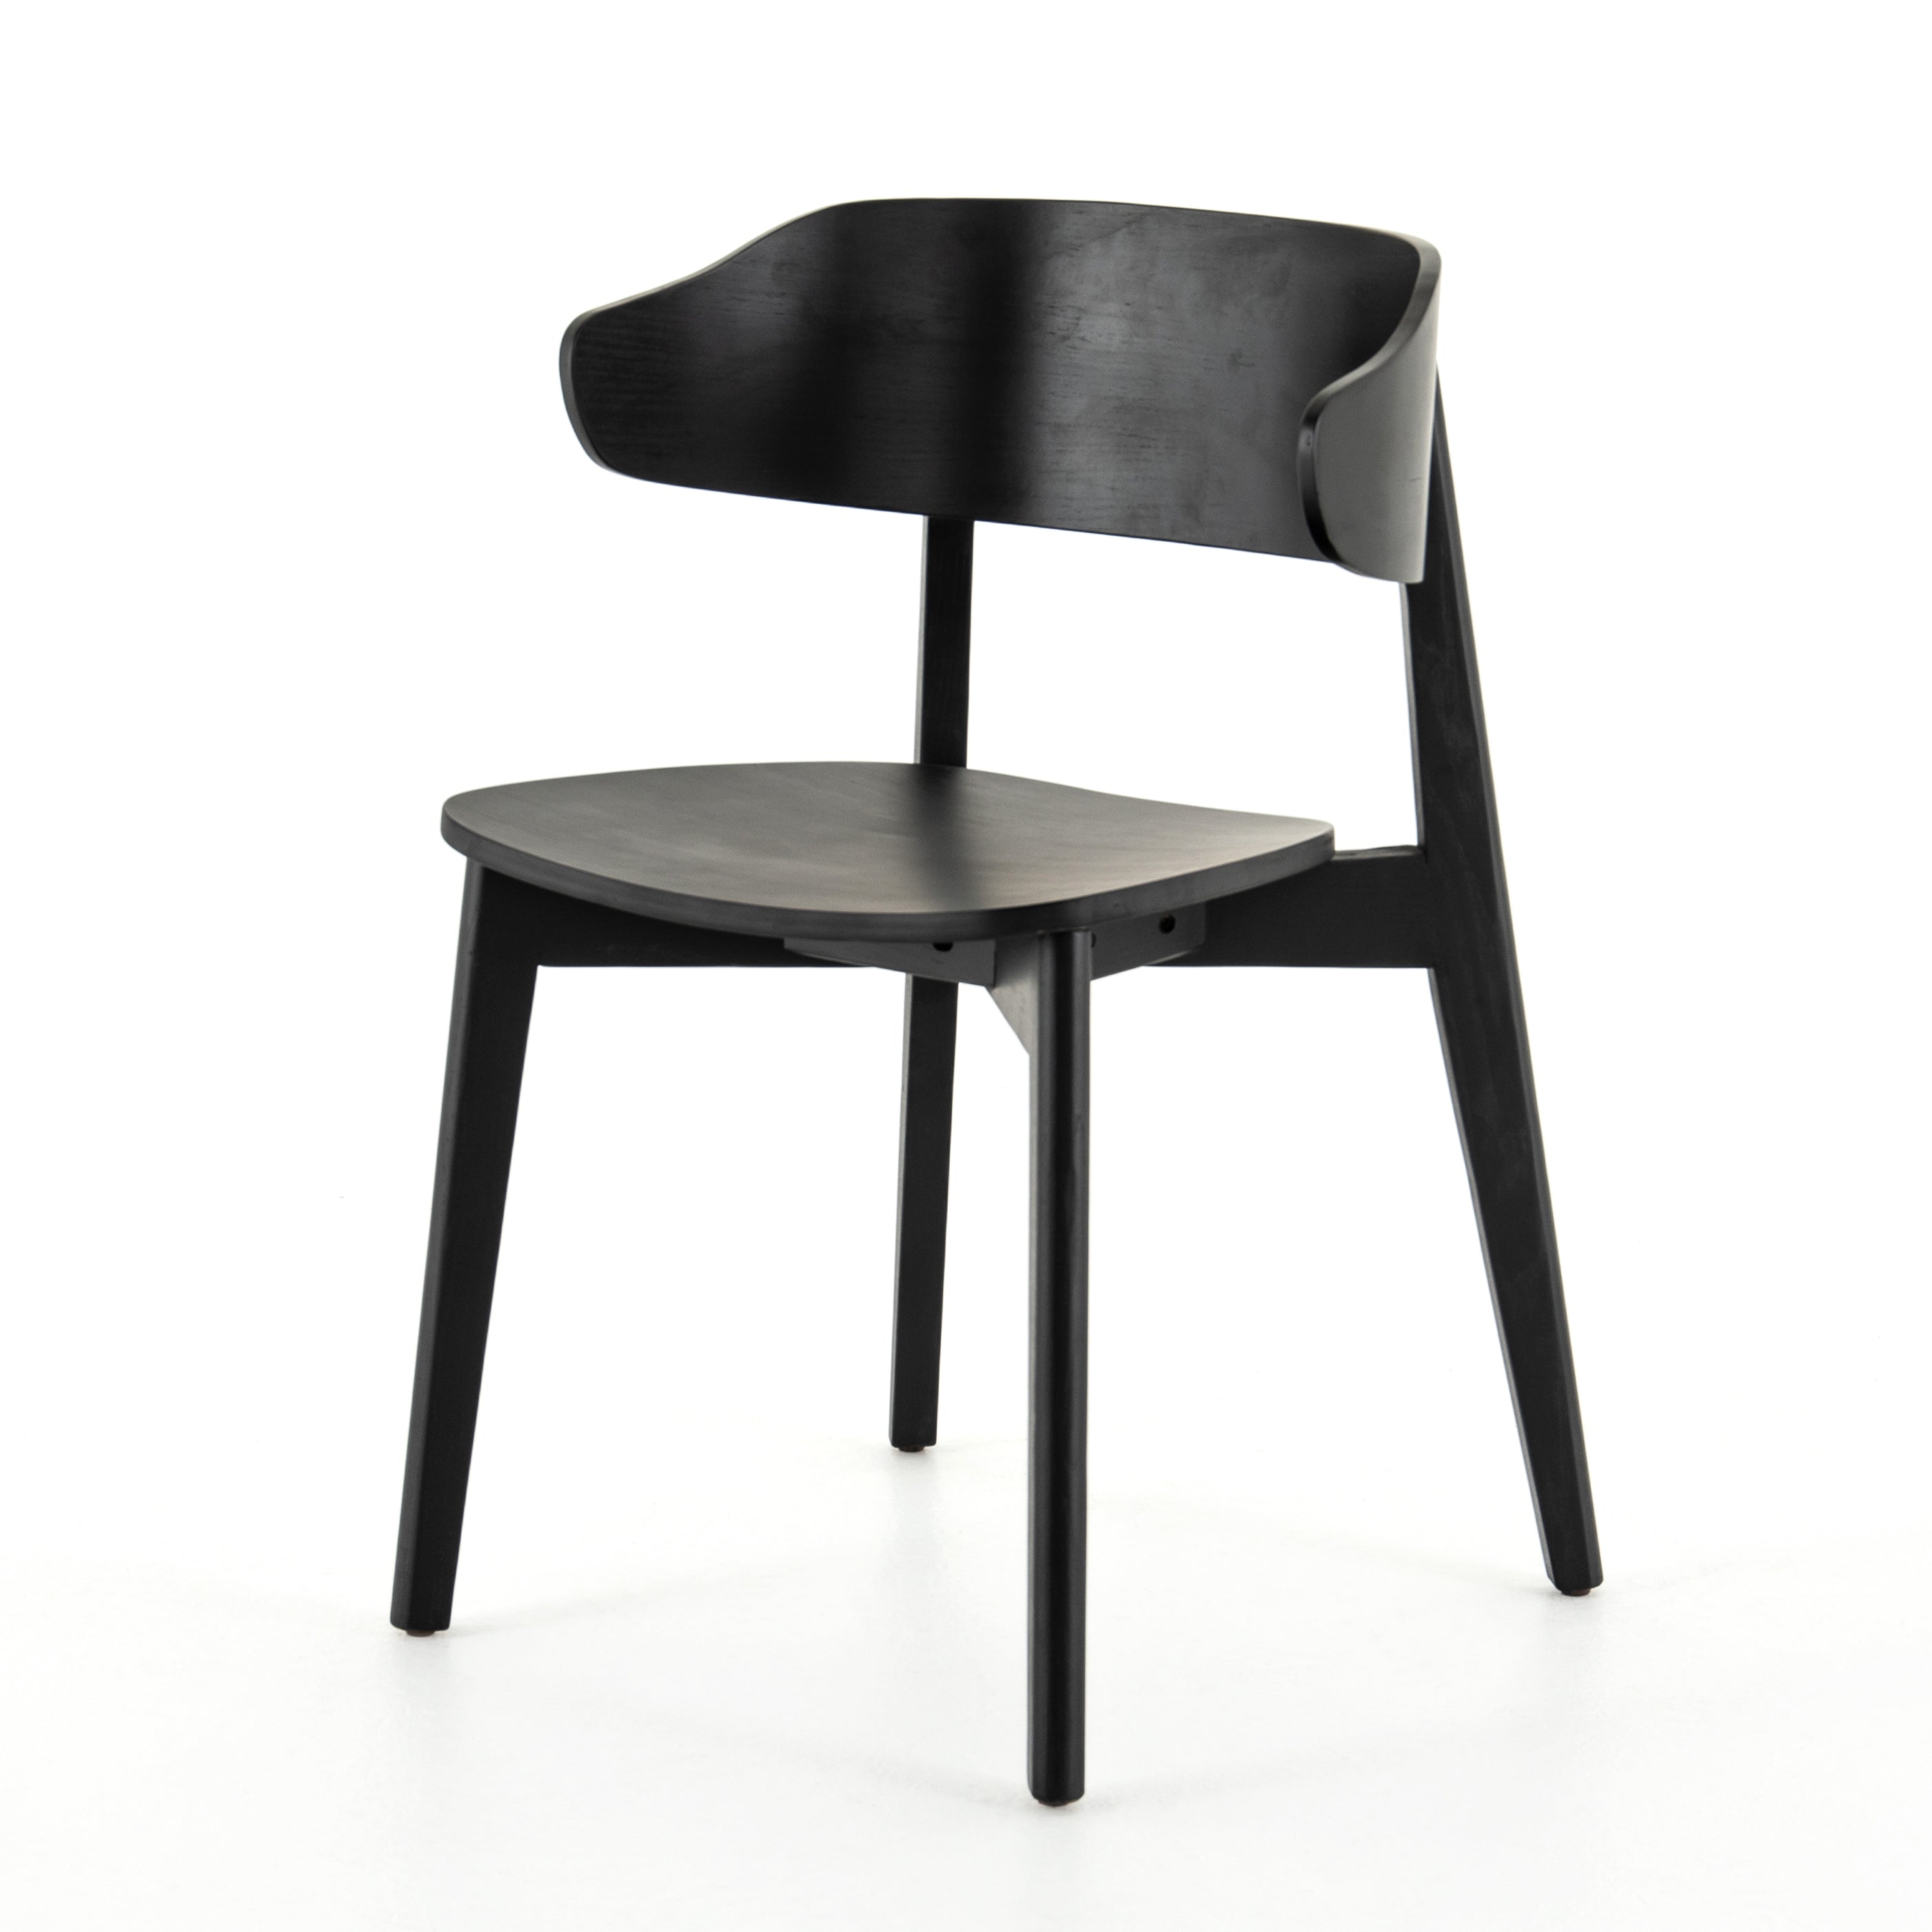 We love the exaggerated winged back of this Franco Black Dining Chair. The jet balck finish brings a modern look to this mid-century style.   Overall Dimensions: 20.50"w x 19.25"d x 30.25"h Seat Depth: 16.25" Seat Height: 18"  Materials: Ash Veneer, Solid Ash